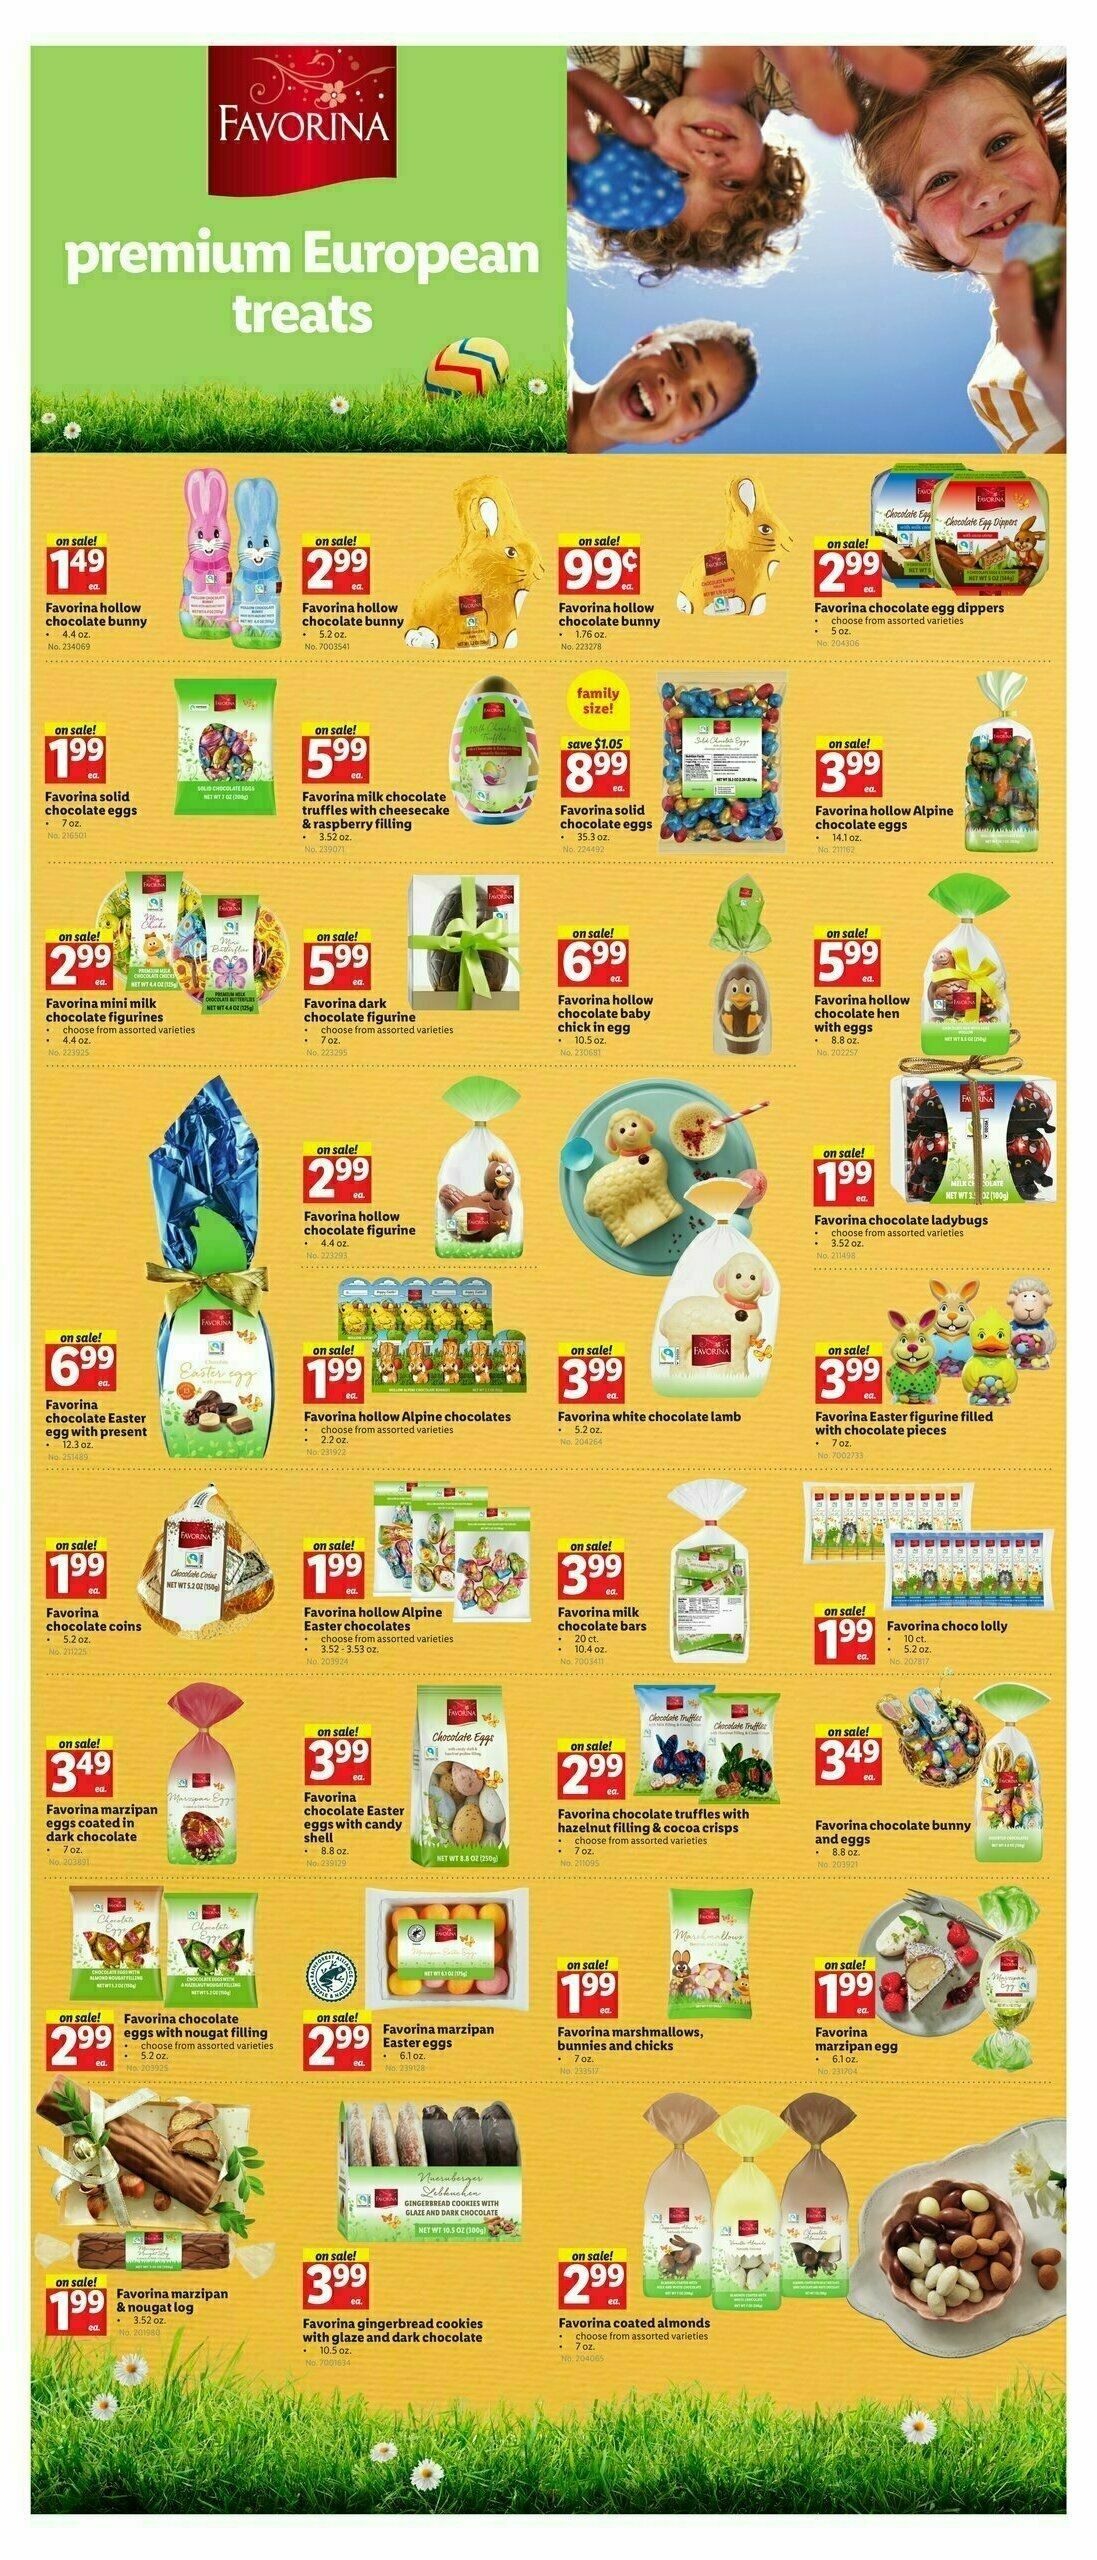 LIDL Weekly Ad from February 28